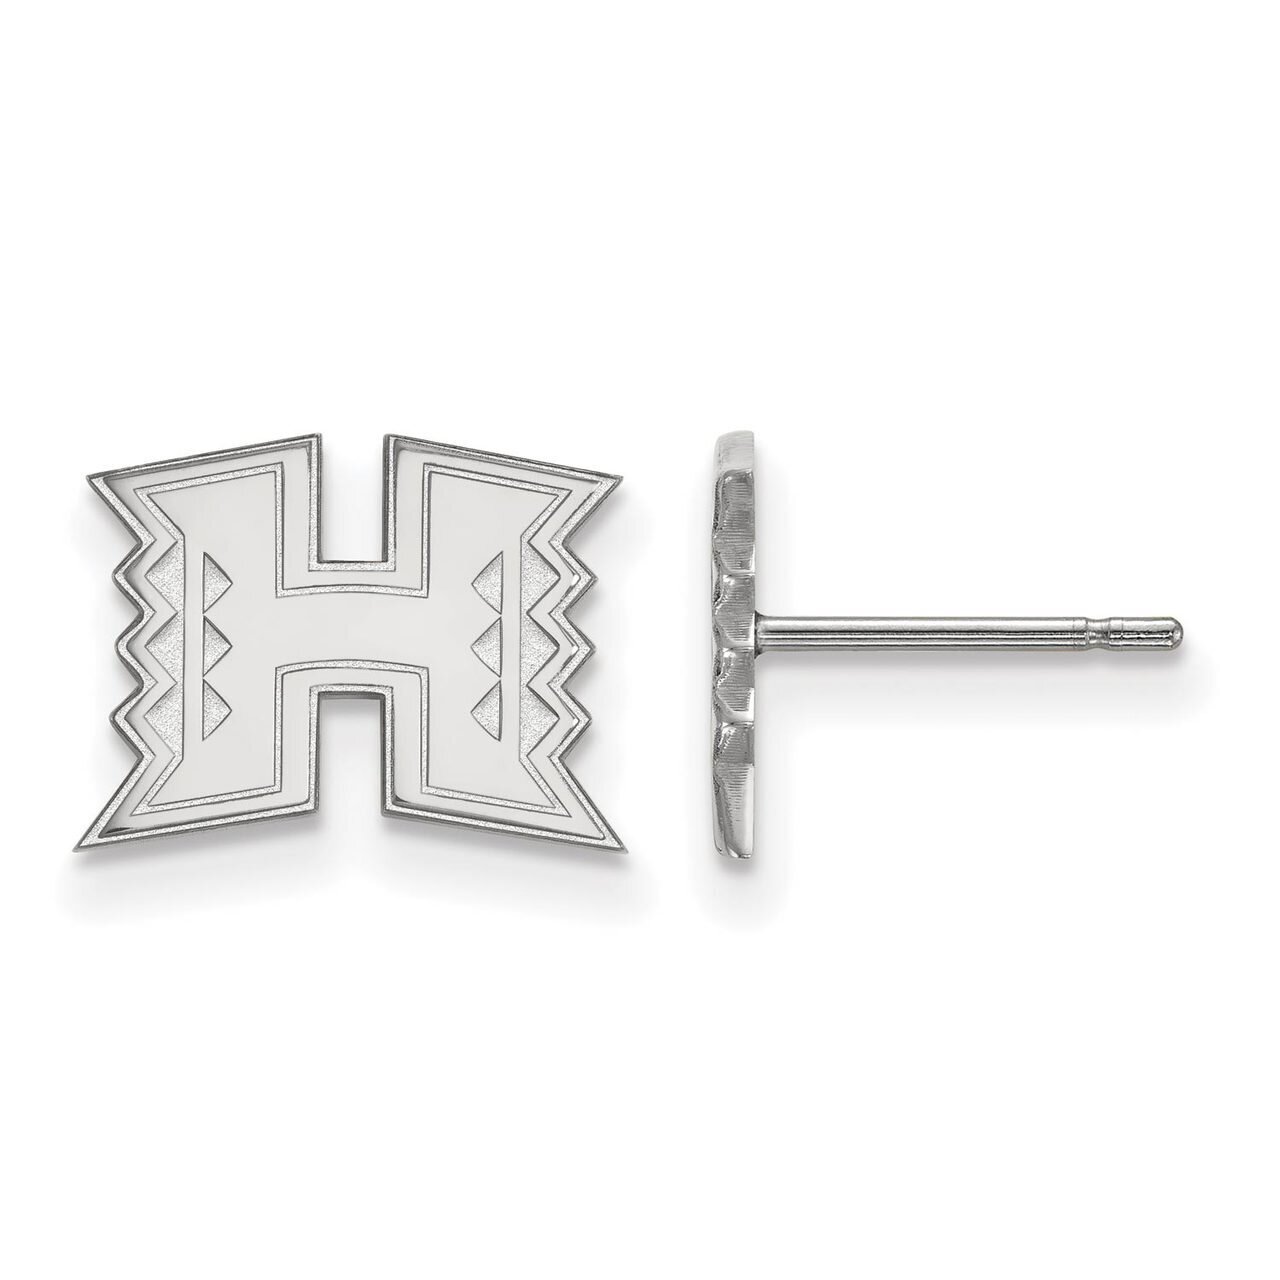 The University of Hawaii x-Small Post Earring 14k White Gold 4W007UHI